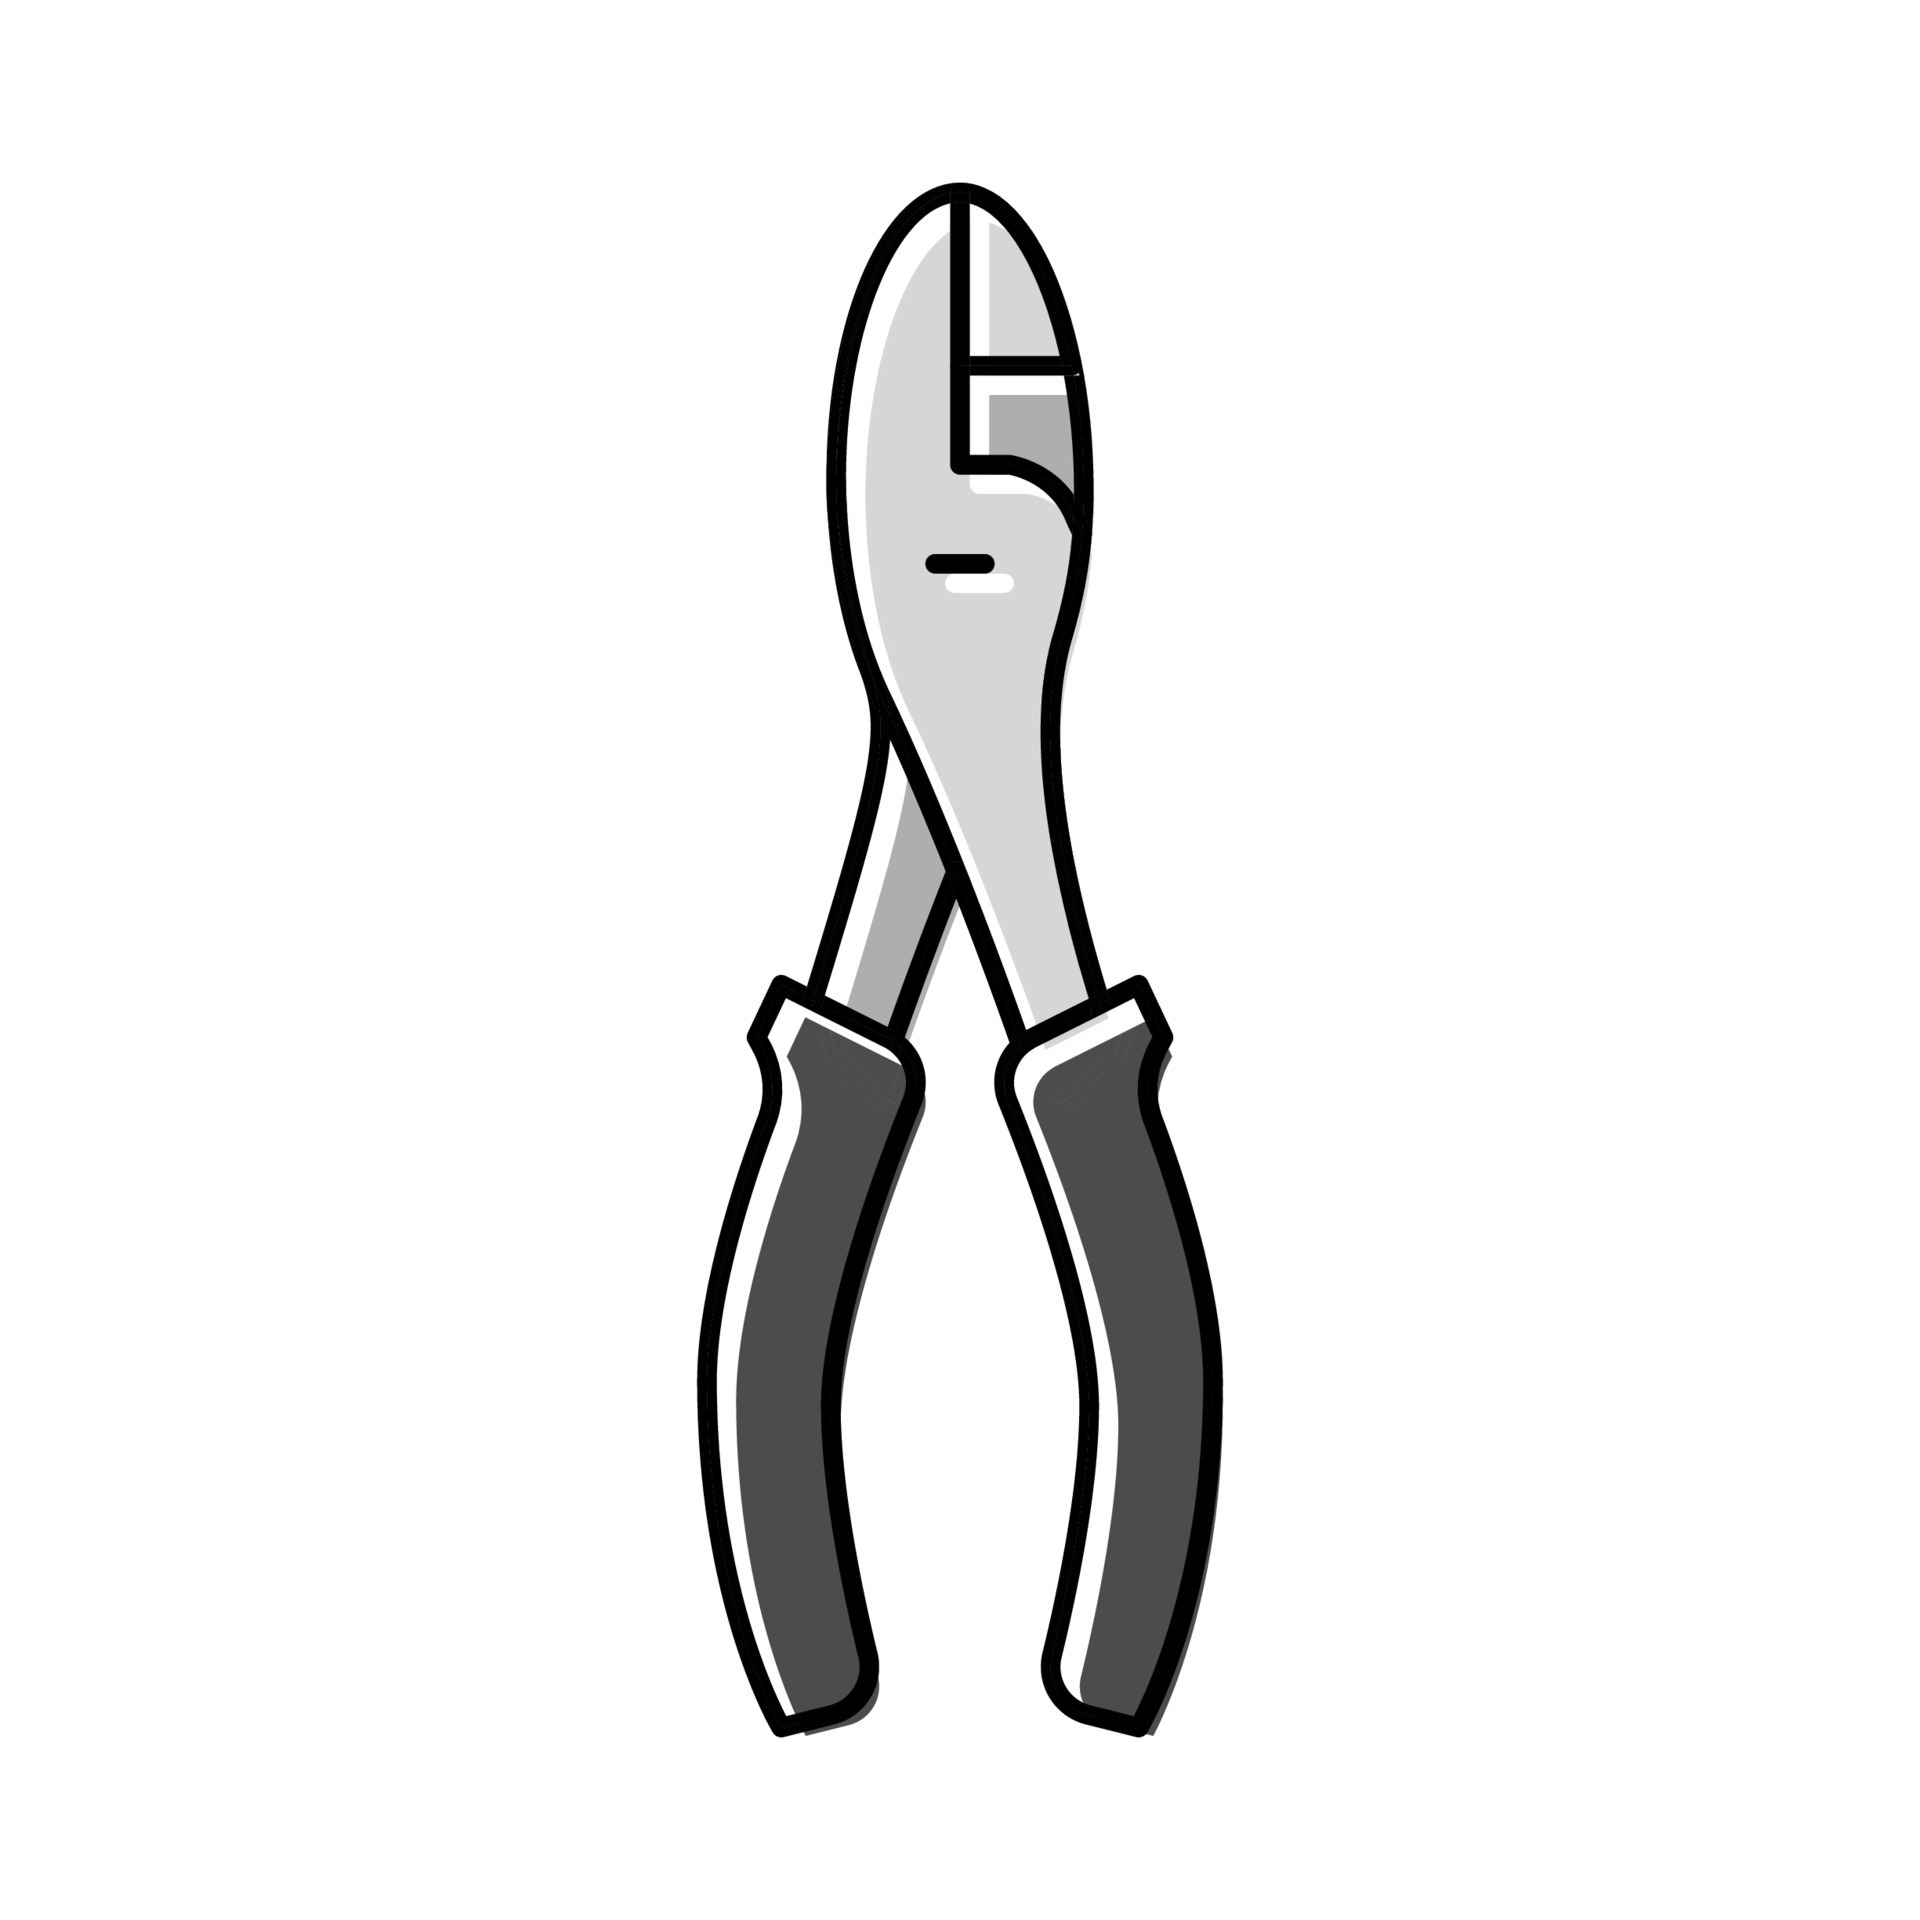 slip joint pliers color icon vector illustration 19591430 Vector